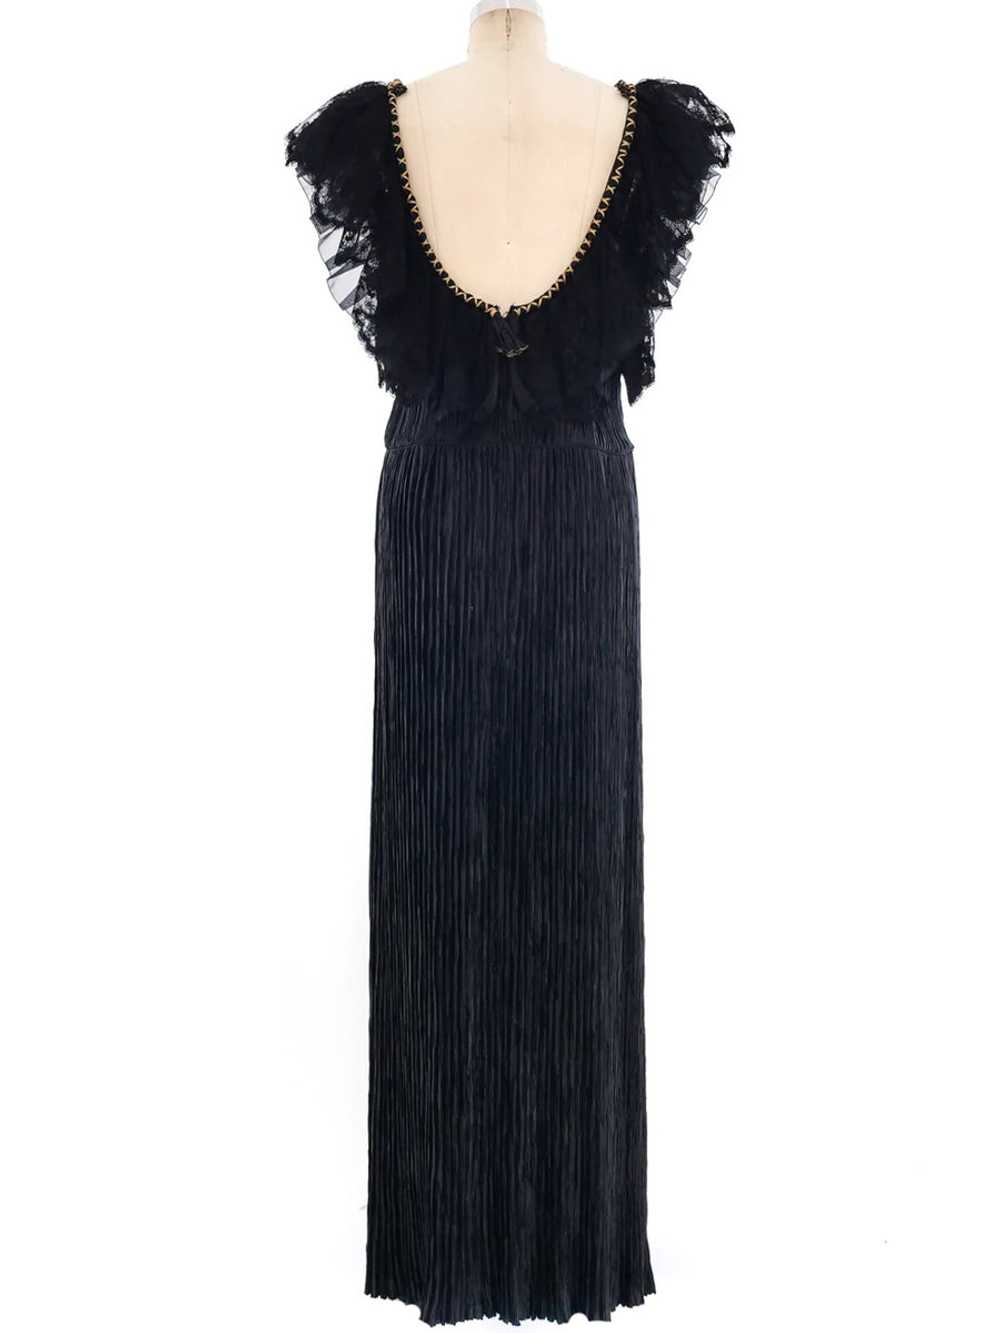 Mary McFadden Plisse Pleated Gown - image 3